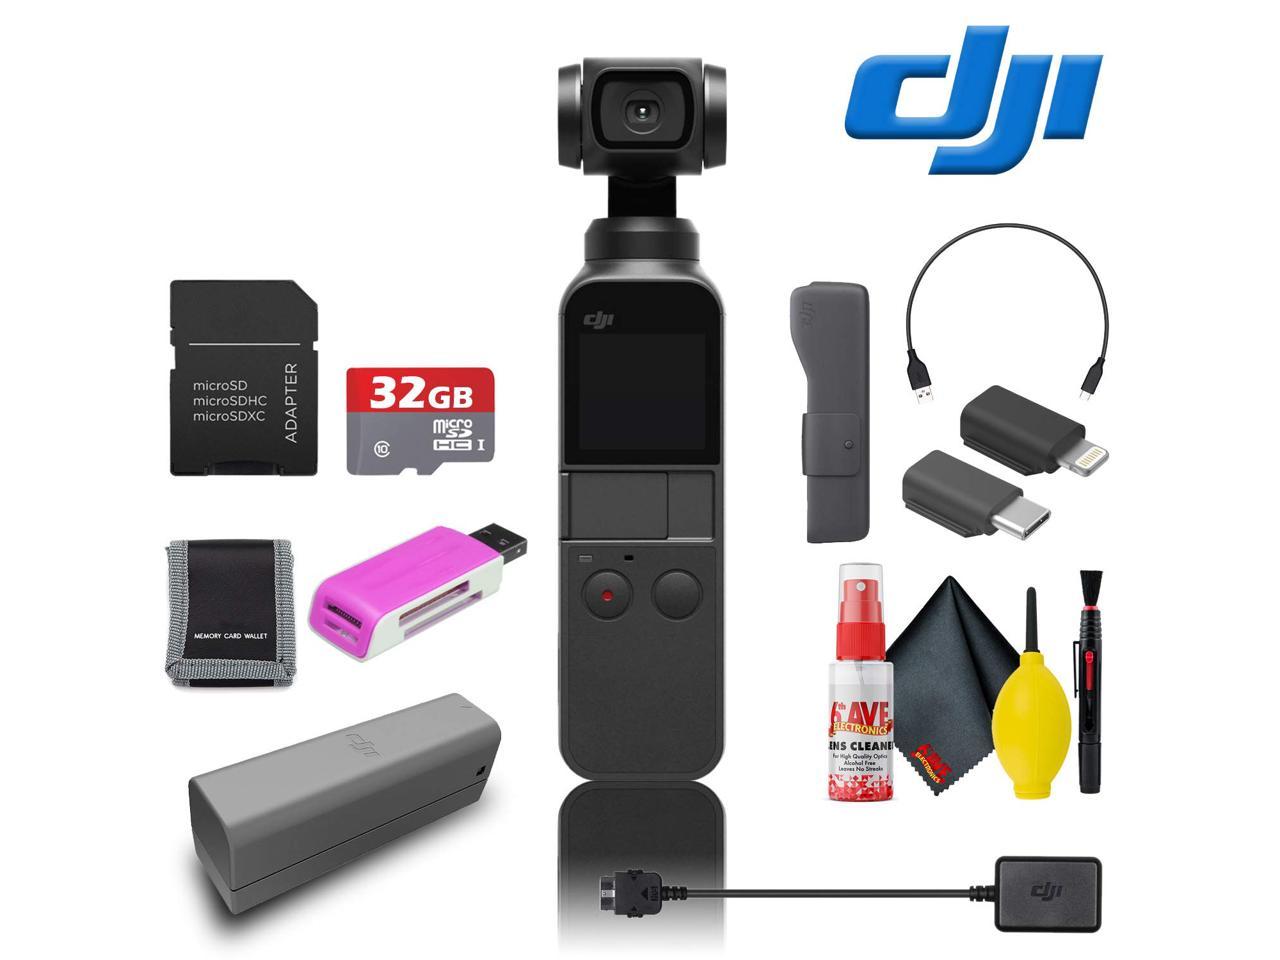 DJI Osmo Pocket Gimbal - Value Kit - Handheld, 3 Axis Gimbal, 4K Video, 12MP, Attachable to Smartphone, Extra Battery, 3